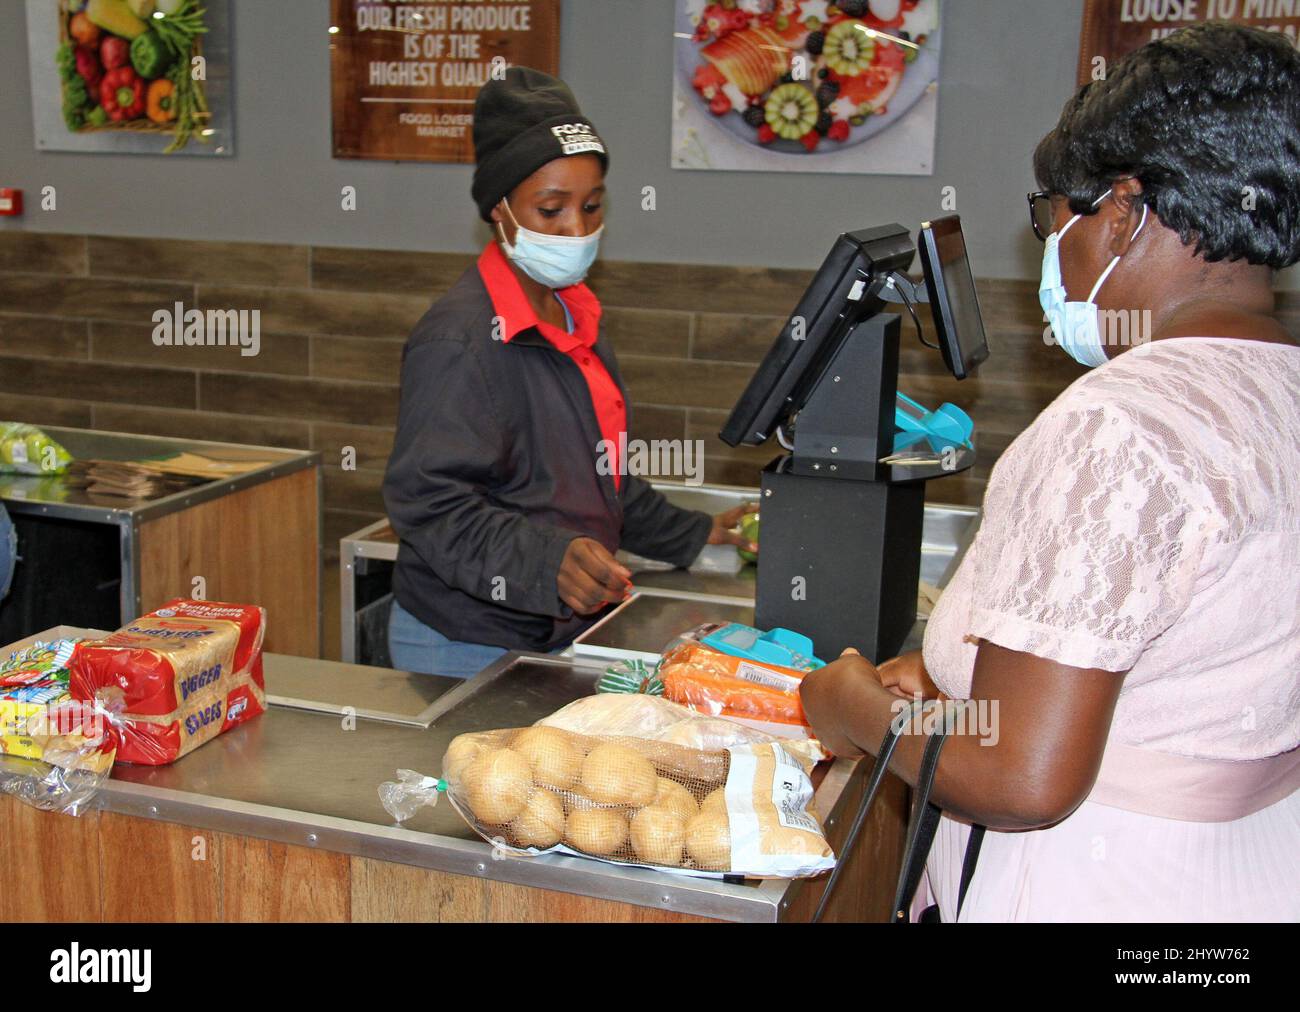 Windhoek, Namibia. 15th Mar, 2022. A woman pays for the goods she purchased in a supermarket in Windhoek, Namibia, March 15, 2022. Namibia's annual inflation rate in February 2022 continued on an upward trend, increasing by 4.5 per cent compared to 2.7 per cent recorded in February 2021, the country's statistics agency (NSA) said Tuesday. Credit: Musa C Kaseke/Xinhua/Alamy Live News Stock Photo